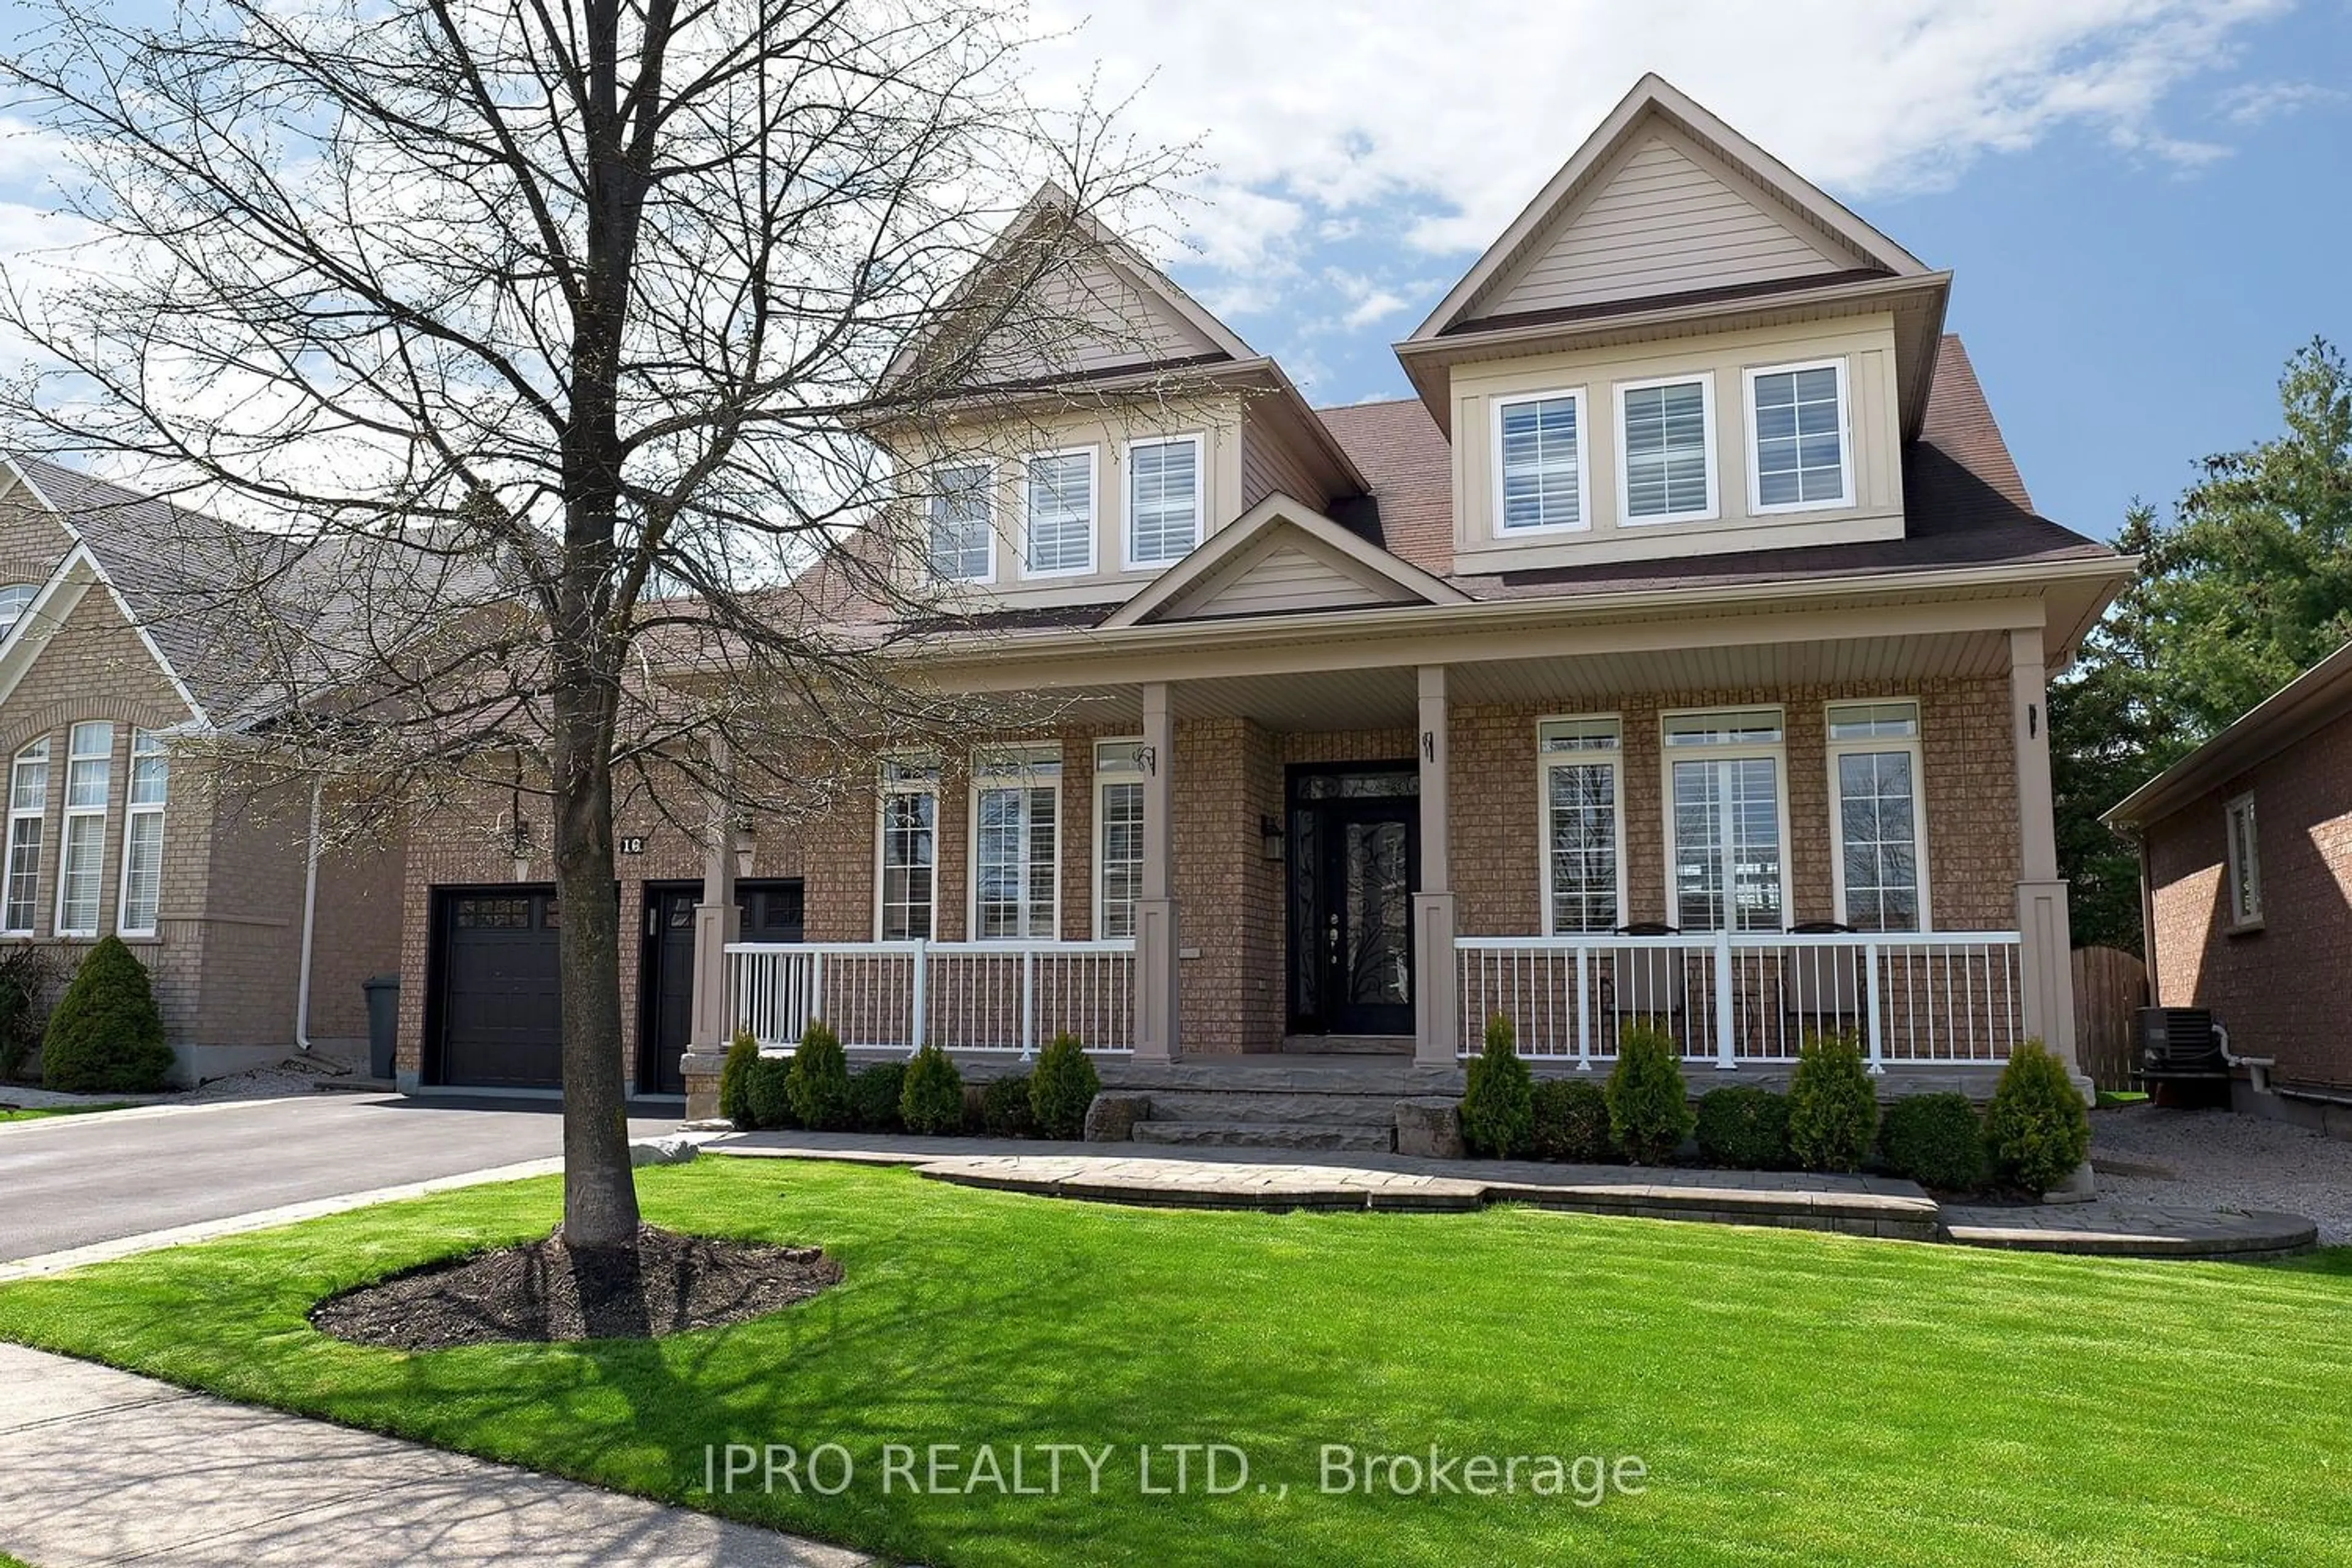 Home with brick exterior material for 16 Shuter Lane, Brampton Ontario L6Y 5P1